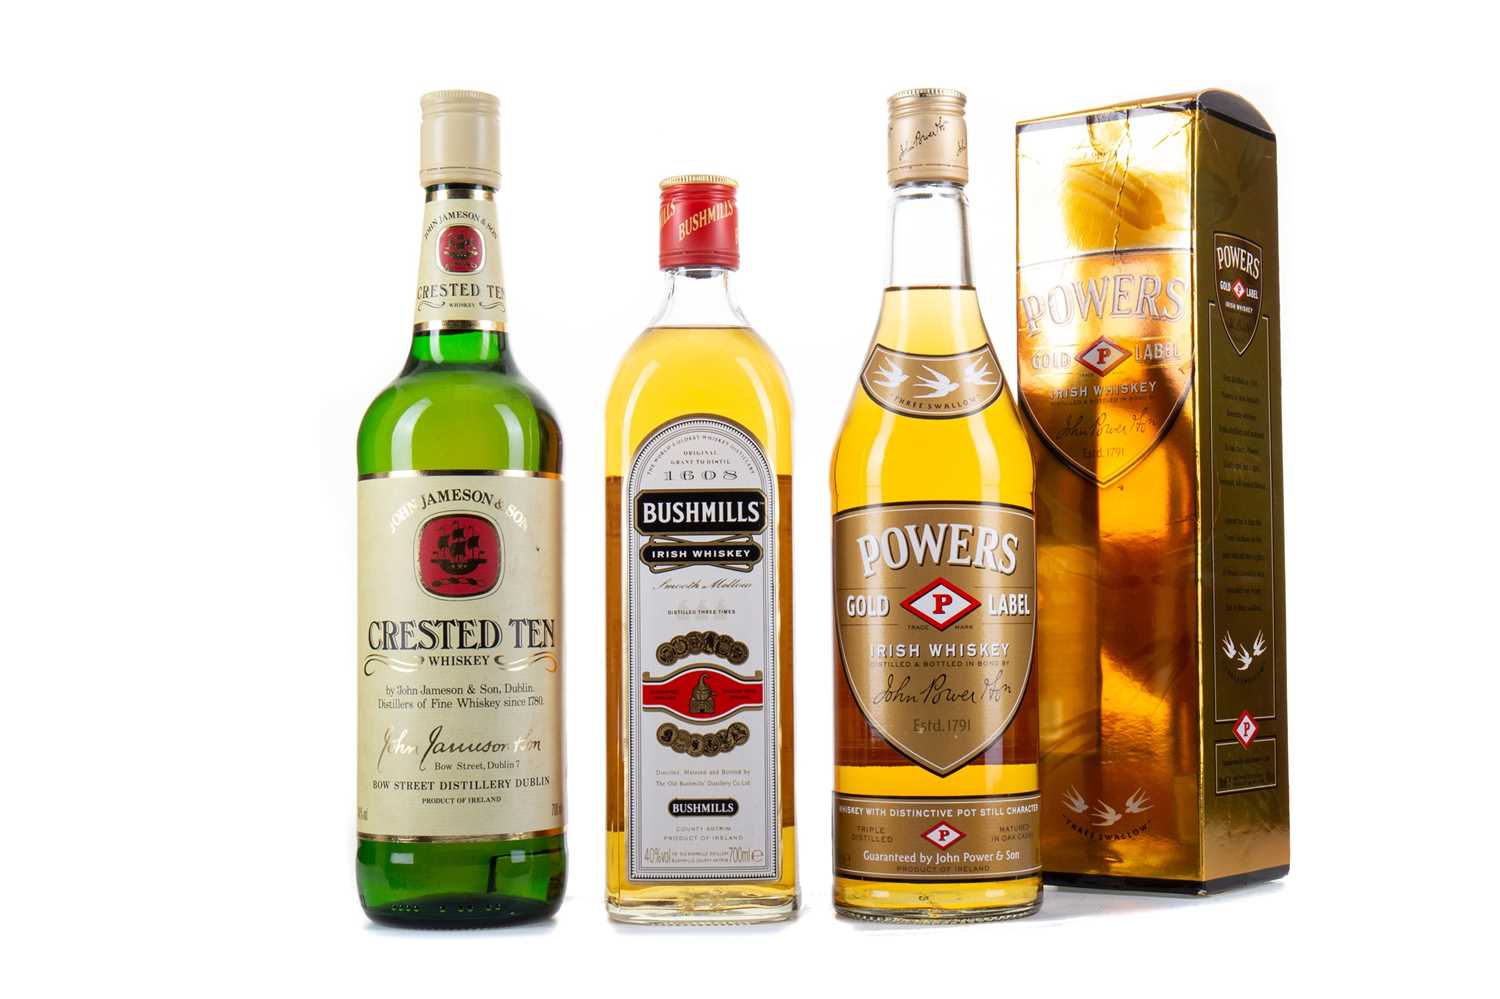 Lot 150 - 3 BOTTLES OF IRISH WHISKEY - POWERS GOLD LABEL, BUSHMILLS AND JAMESON CRESTED TEN